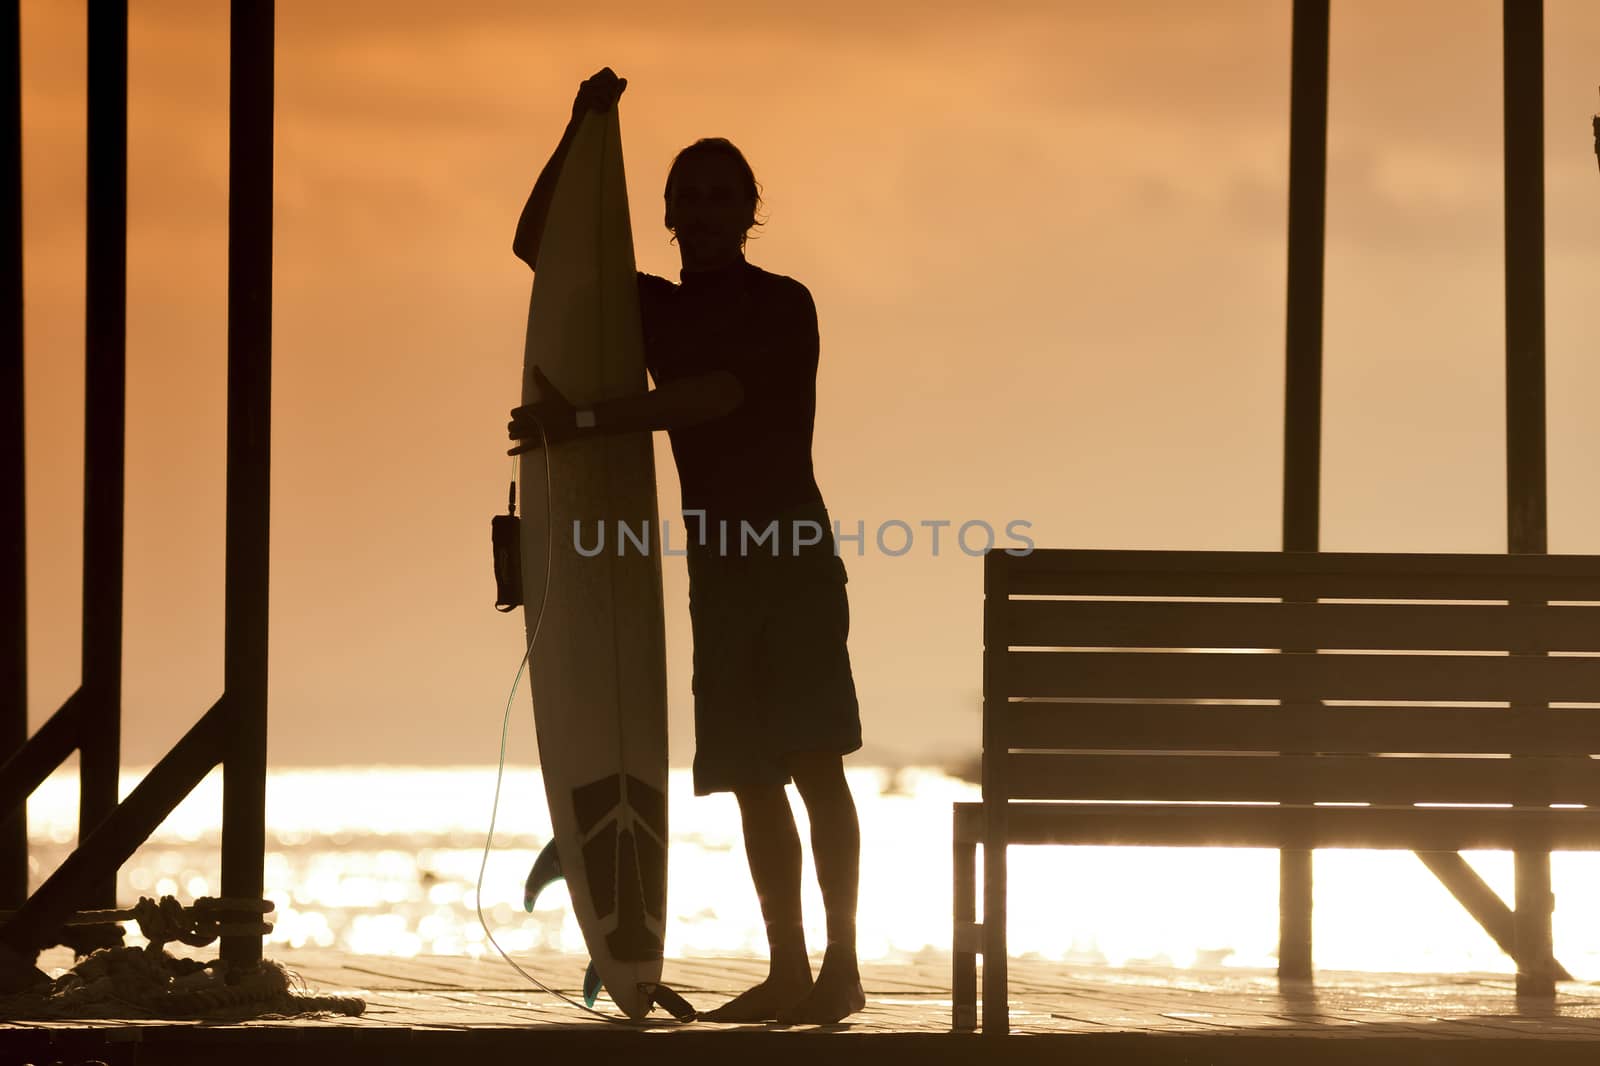 Surfer  at Sunset Tme by truphoto